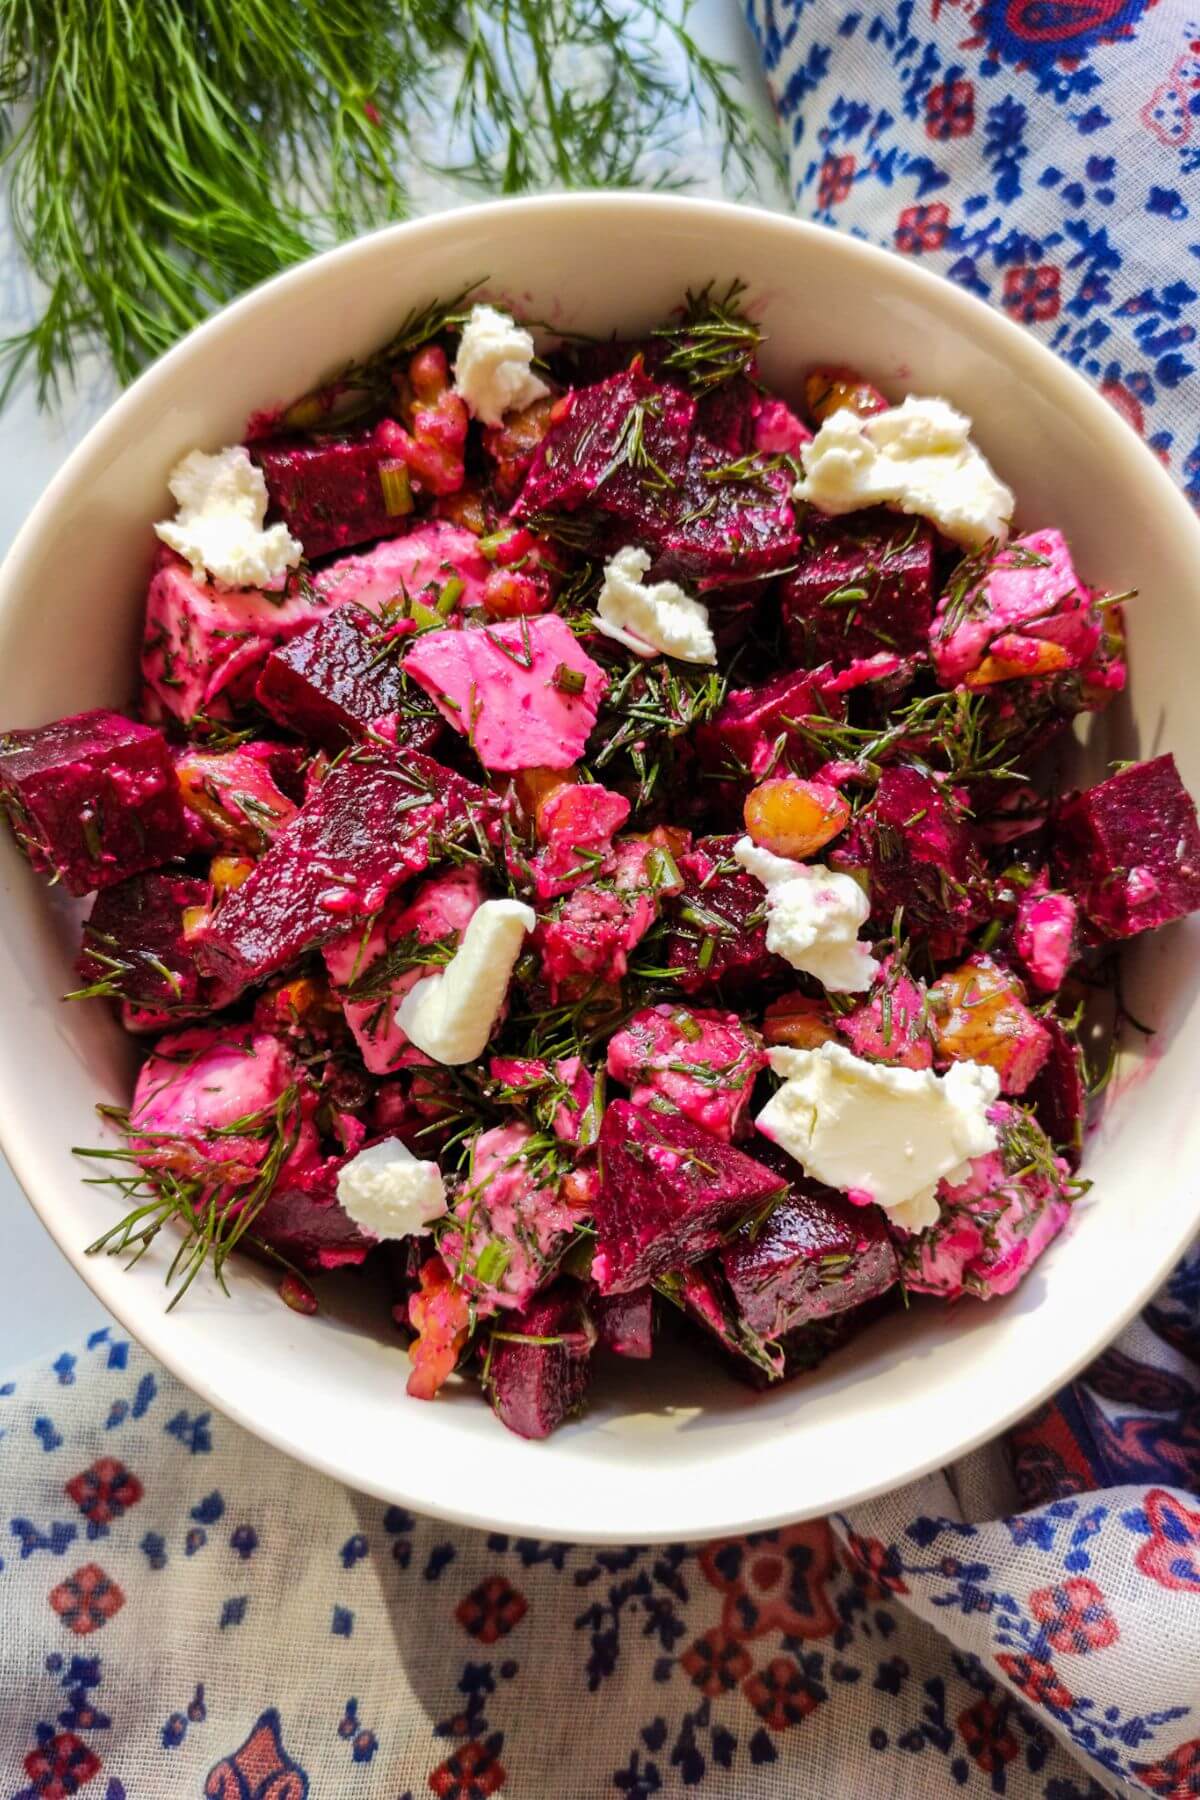 Beet Salad with feta served in a white bowl